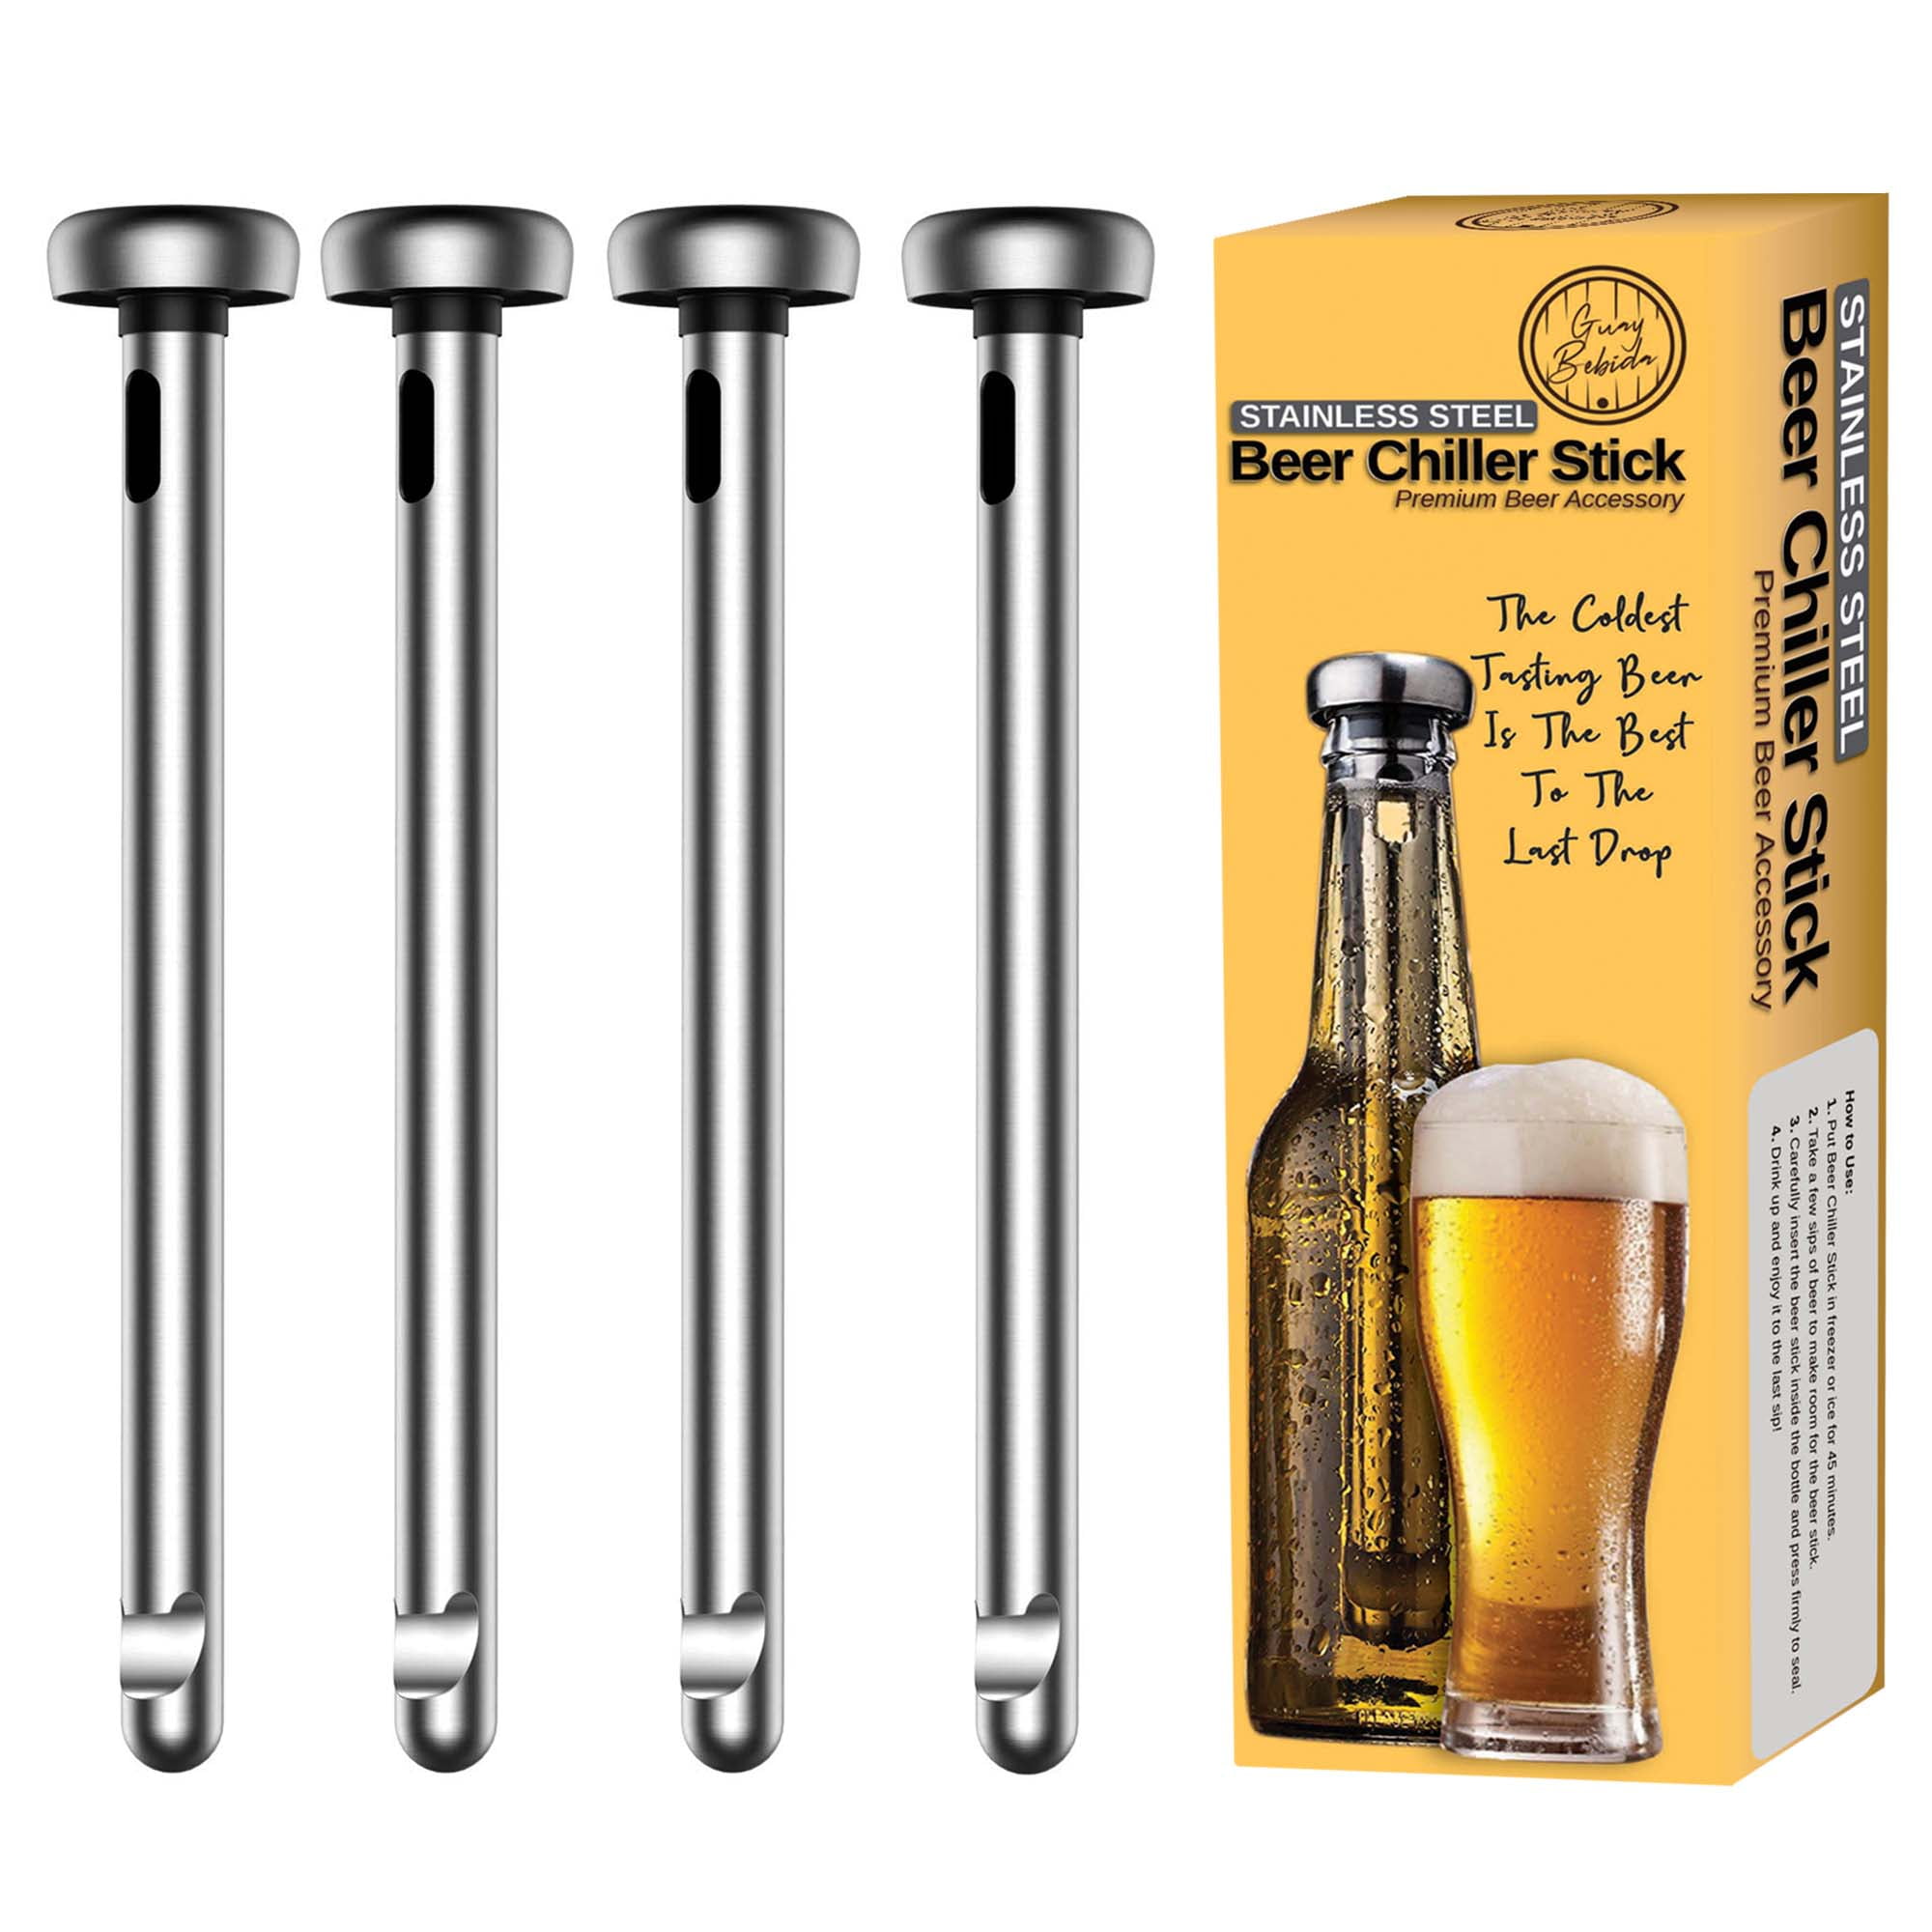 2 Pack Stainless Steel Drink Chiller Sticks Keep Bottled Drinks Cold Beer Chiller By Chiller Industries Built-In Bottle Opener Cools Beverage Without Watering It Down 